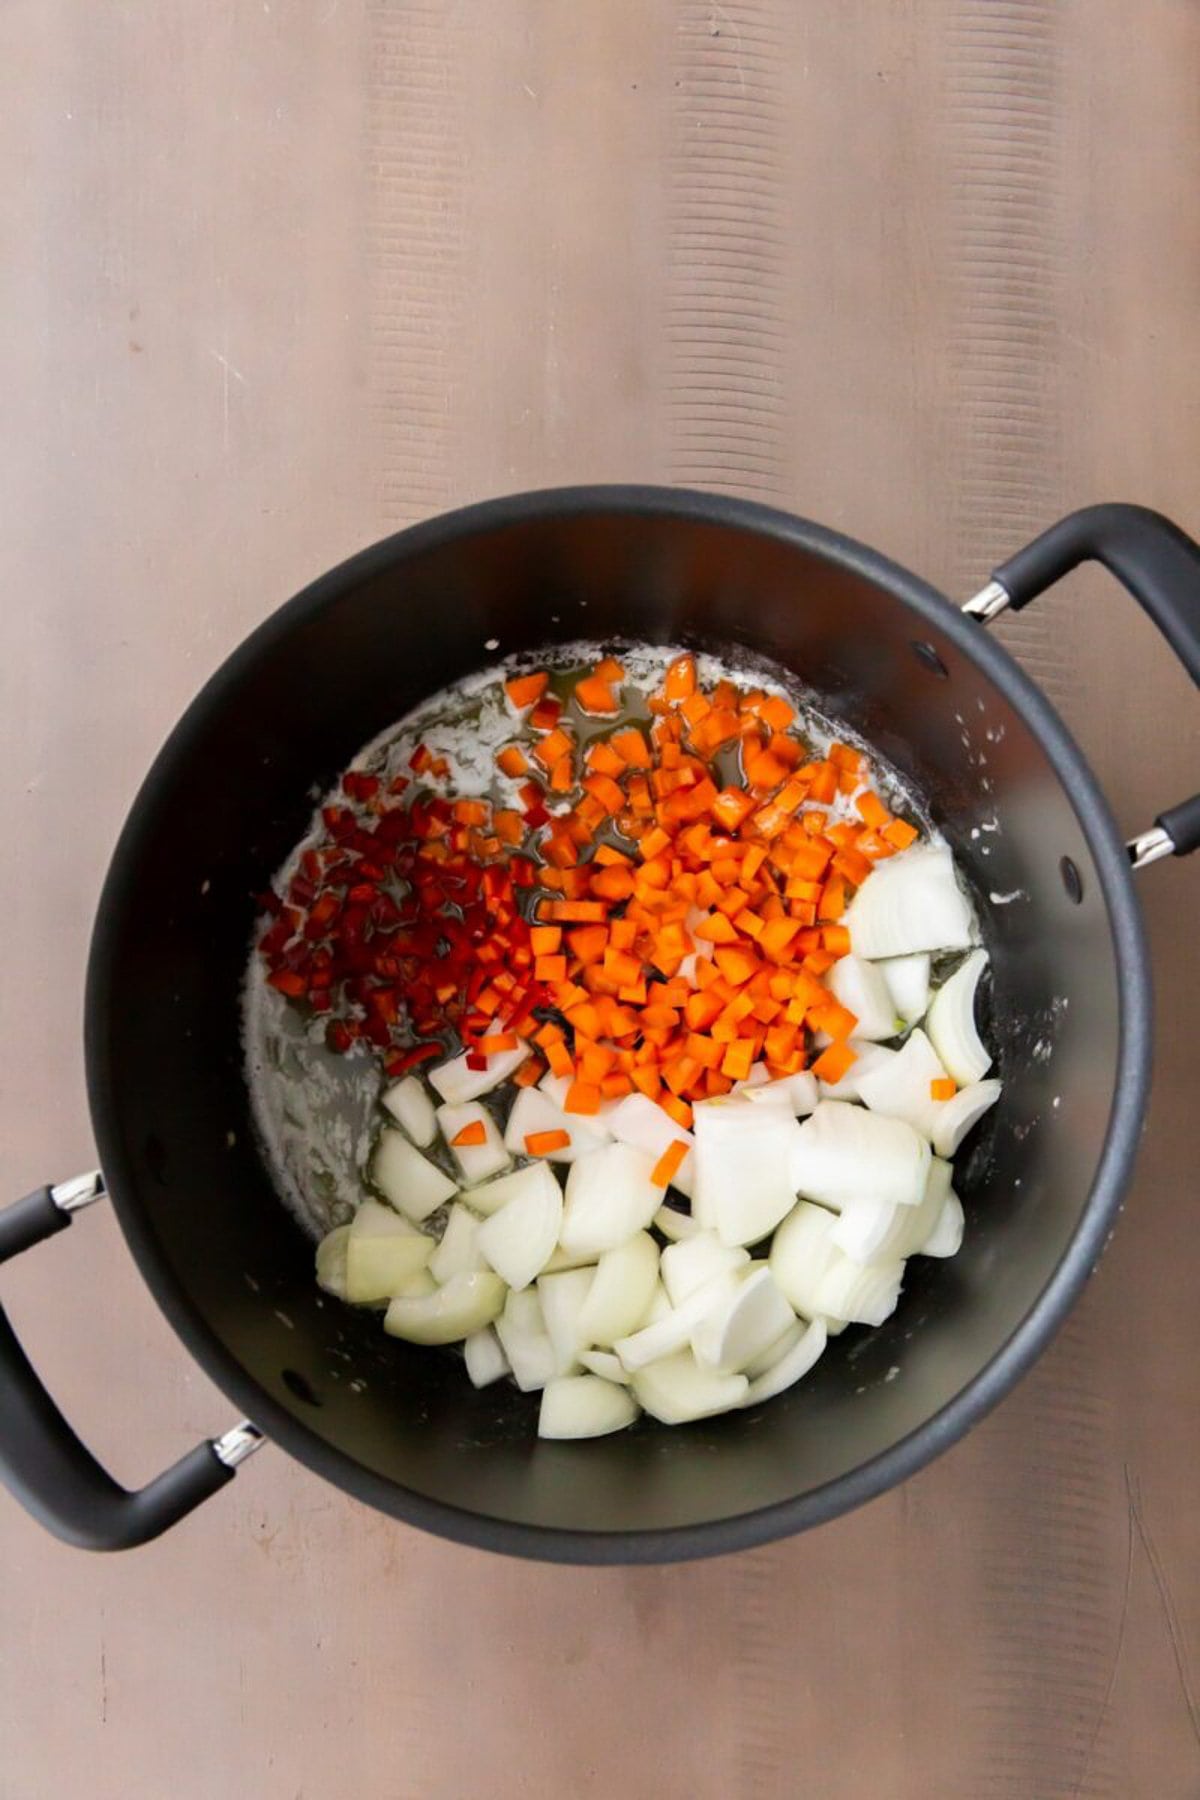 Onions, carrots, and peppers cooking in a pot.